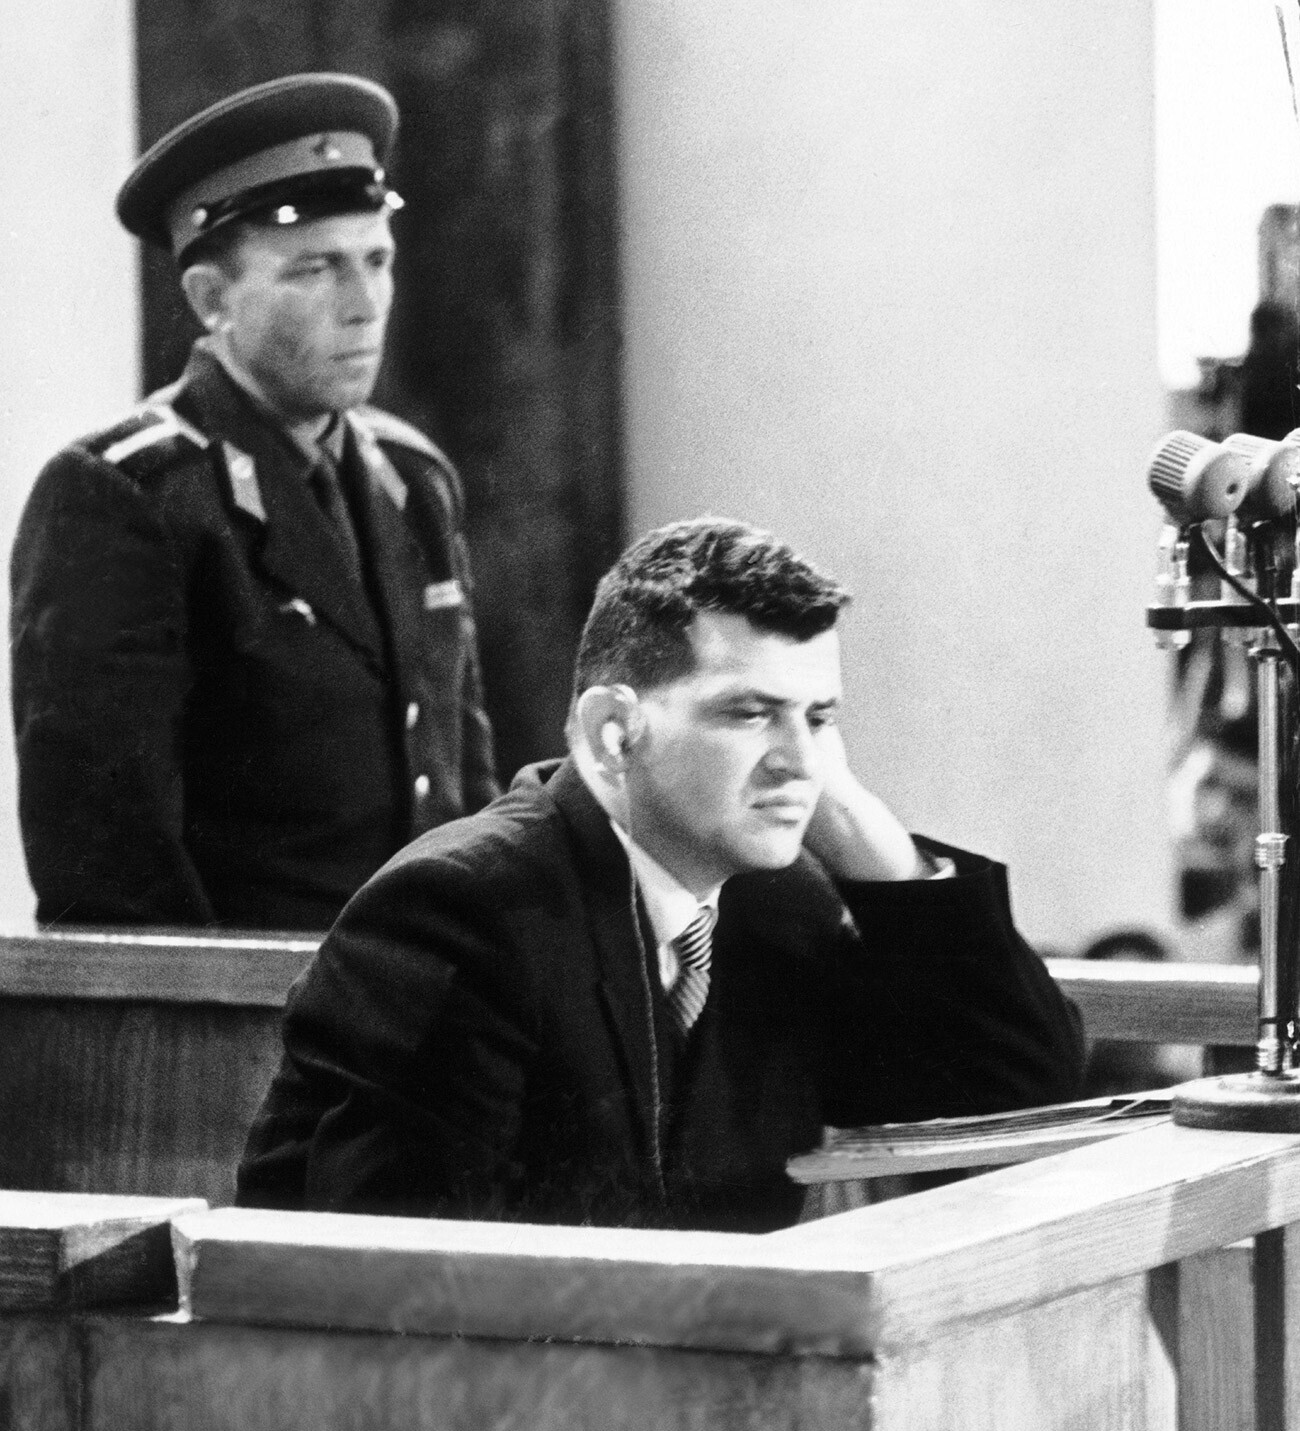 The Pilot Francis Gary Powers judged by the Soviet court for espionage in 1960.